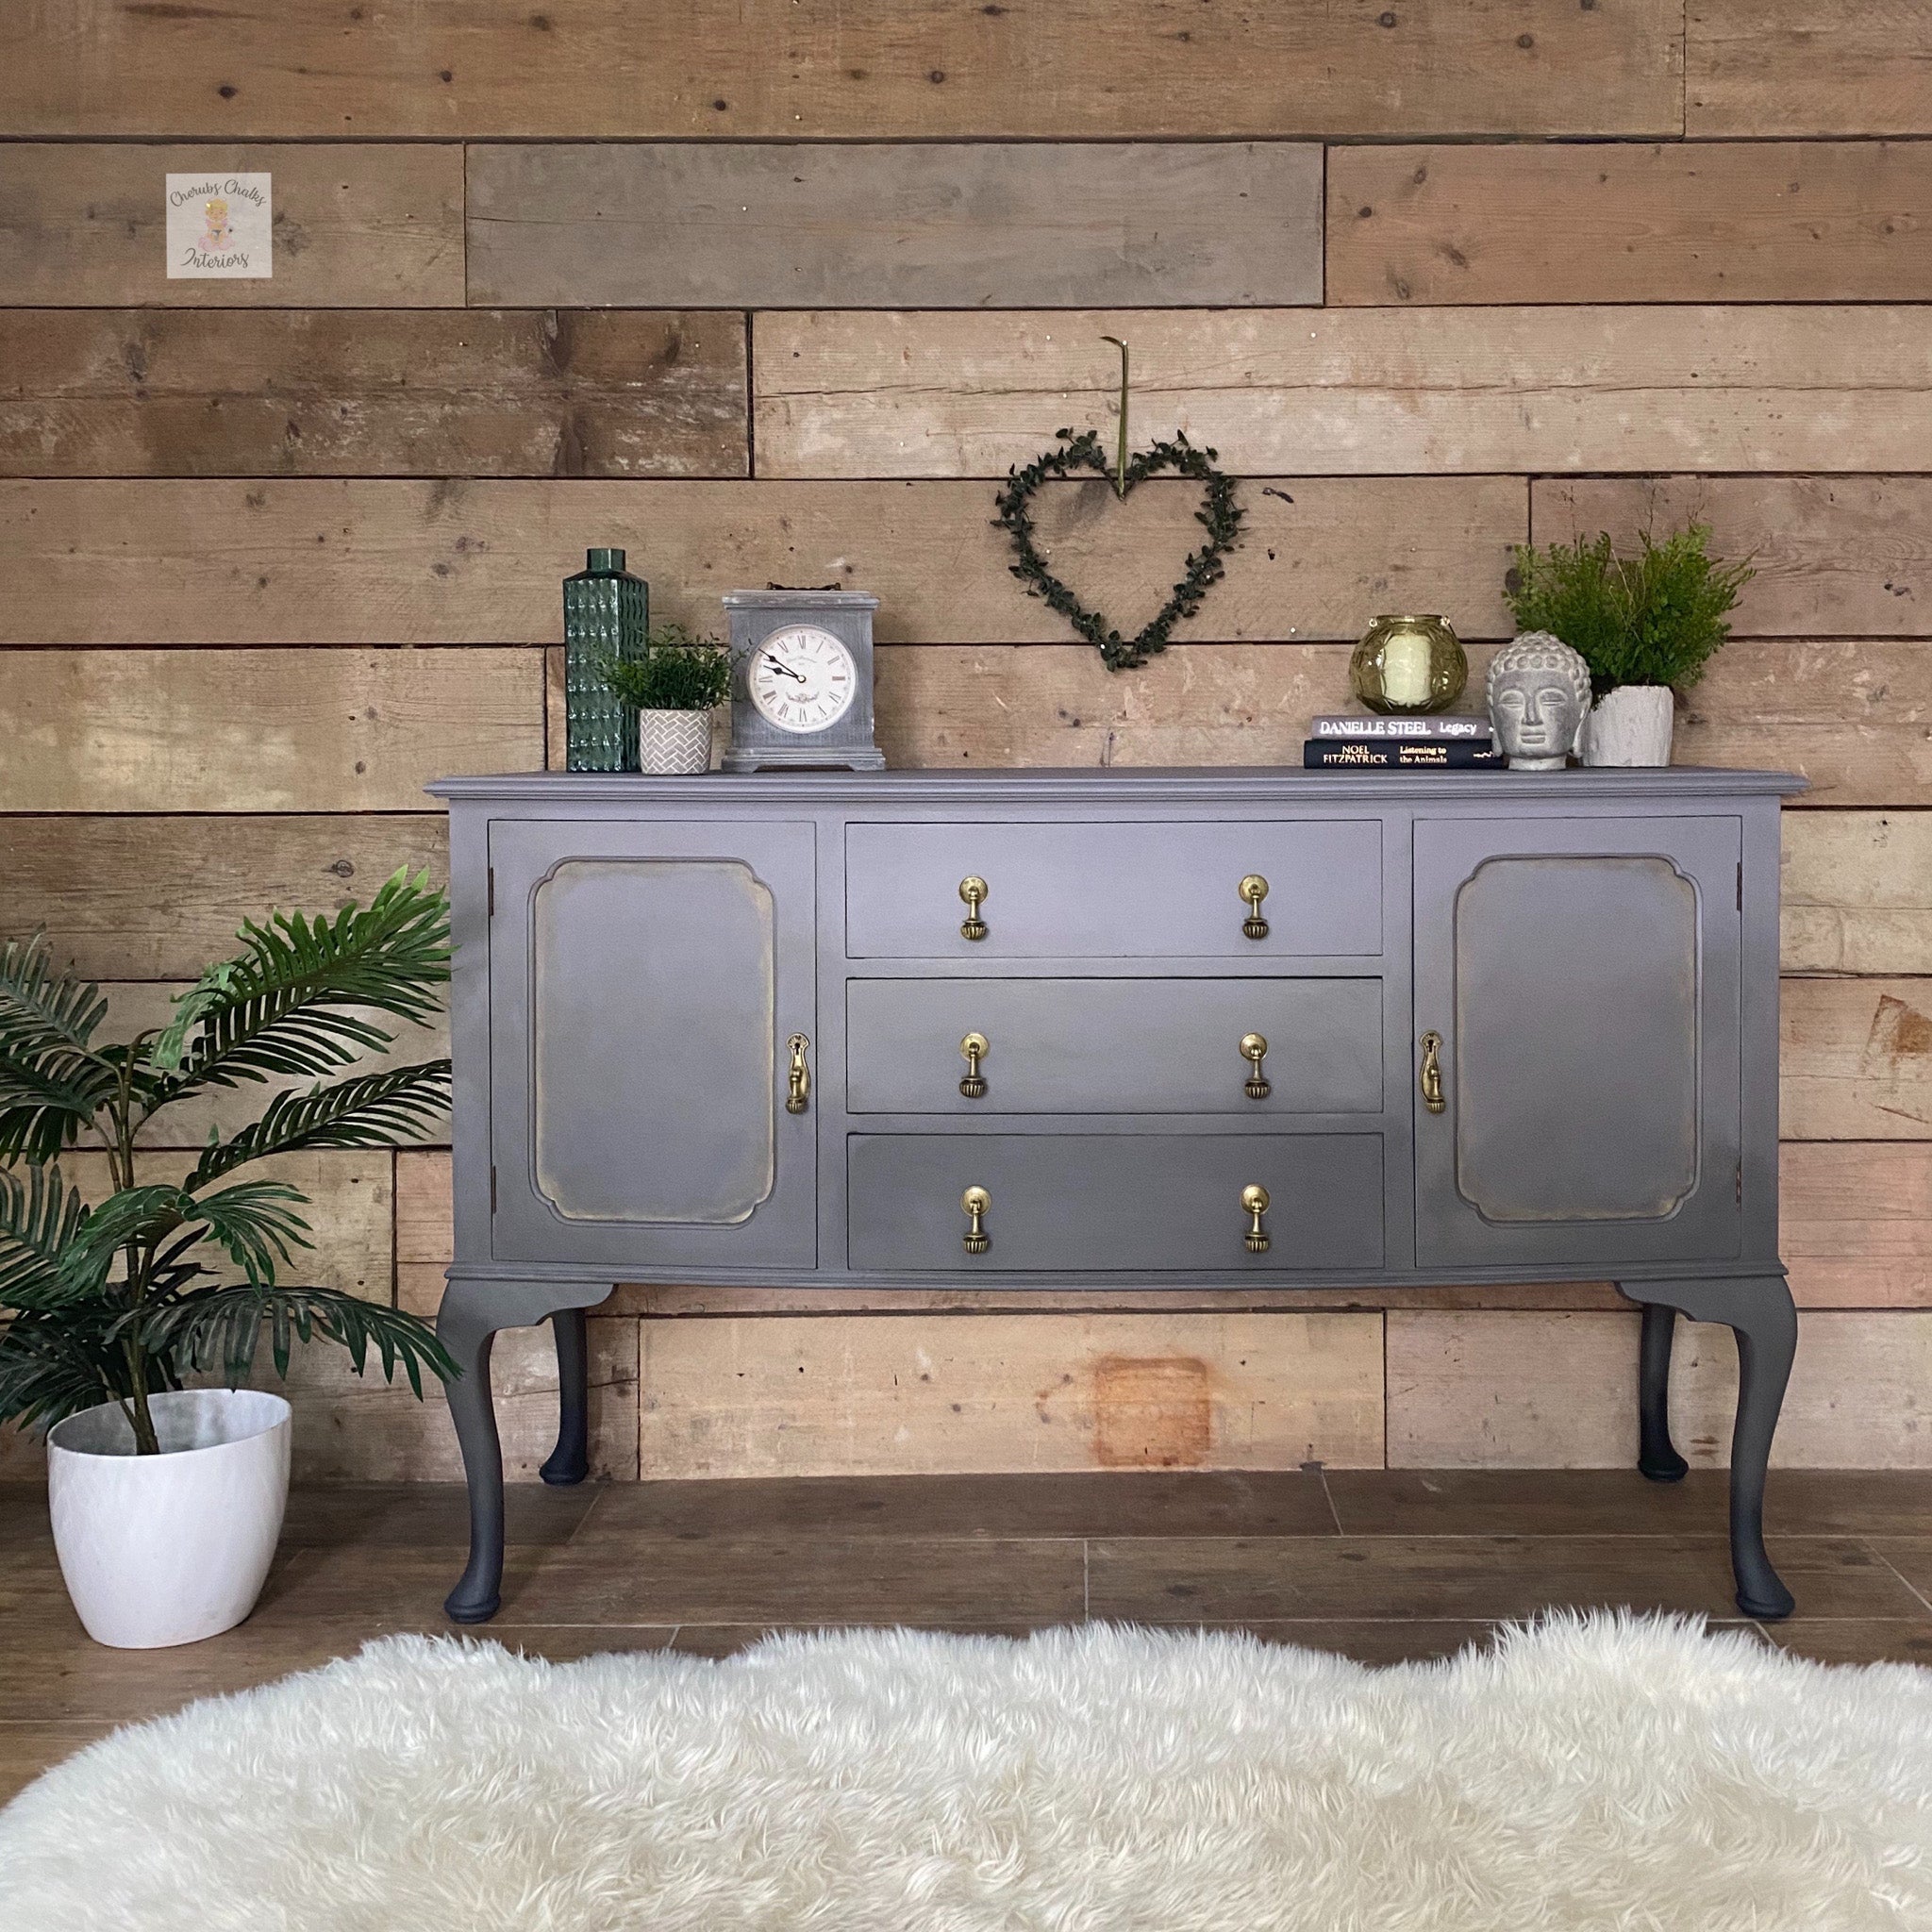 A vintage small buffet table refurbished by Cherubs Chalks Interoirs is painted in Dixie Belle's Mason Dixon chalk mineral paint.